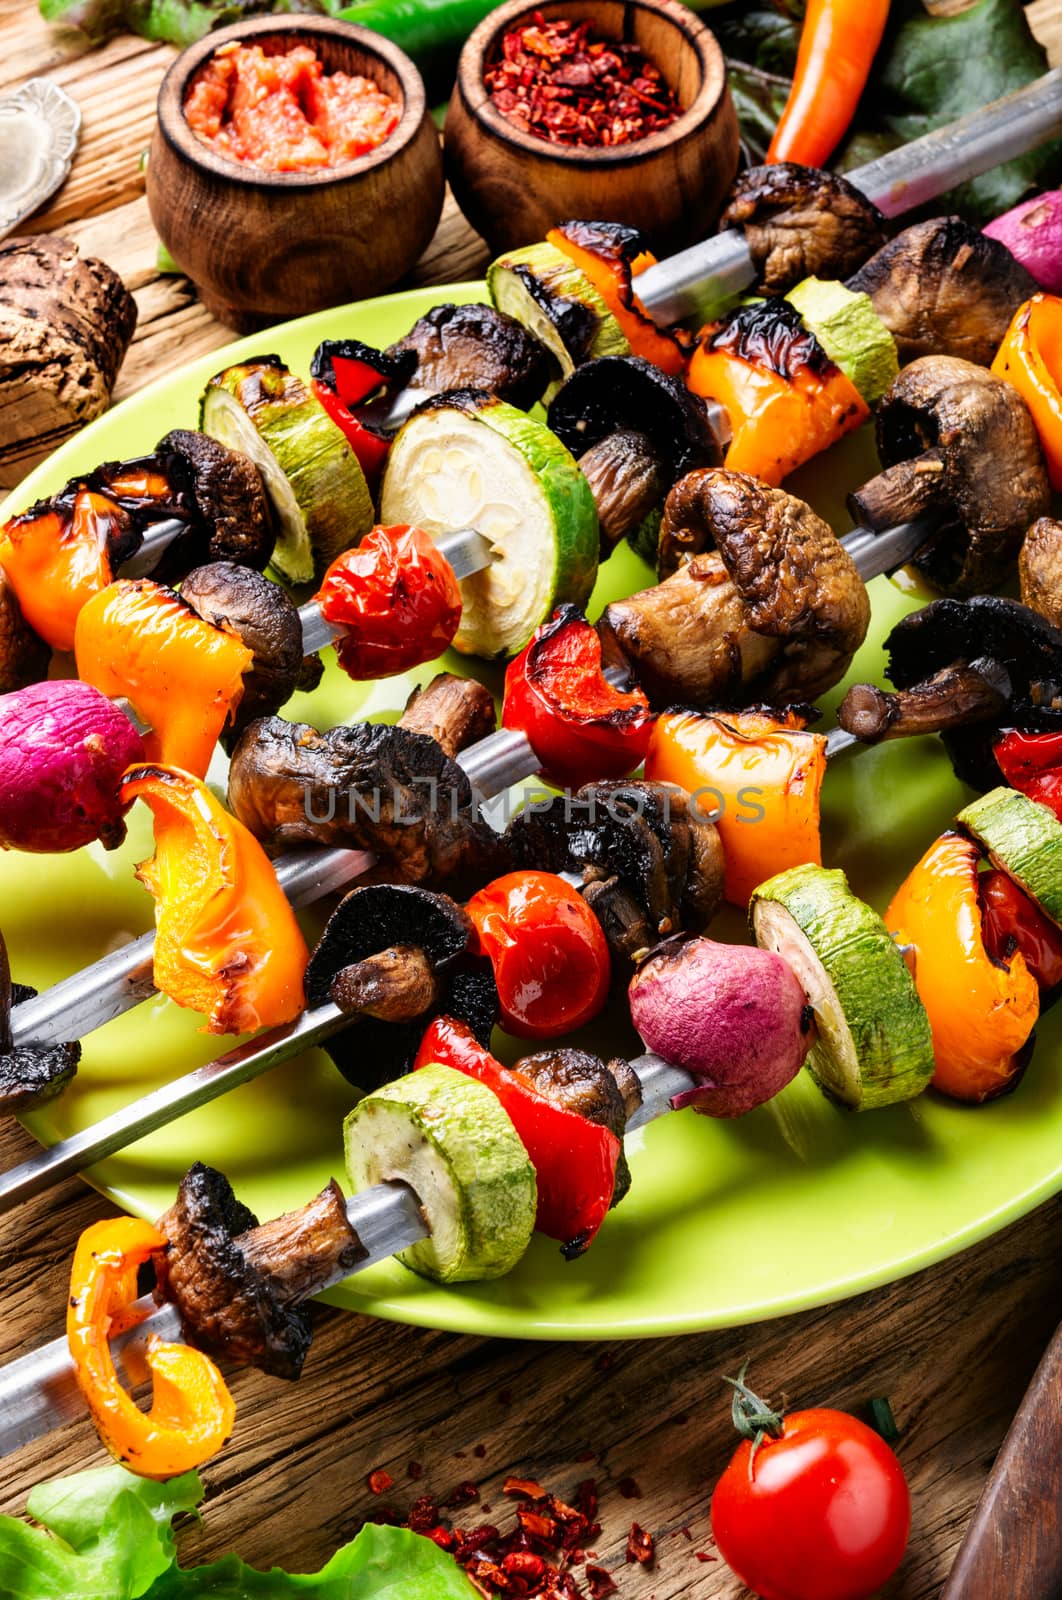 Grilled vegetable shish kebab with peppers, mushrooms, and onions